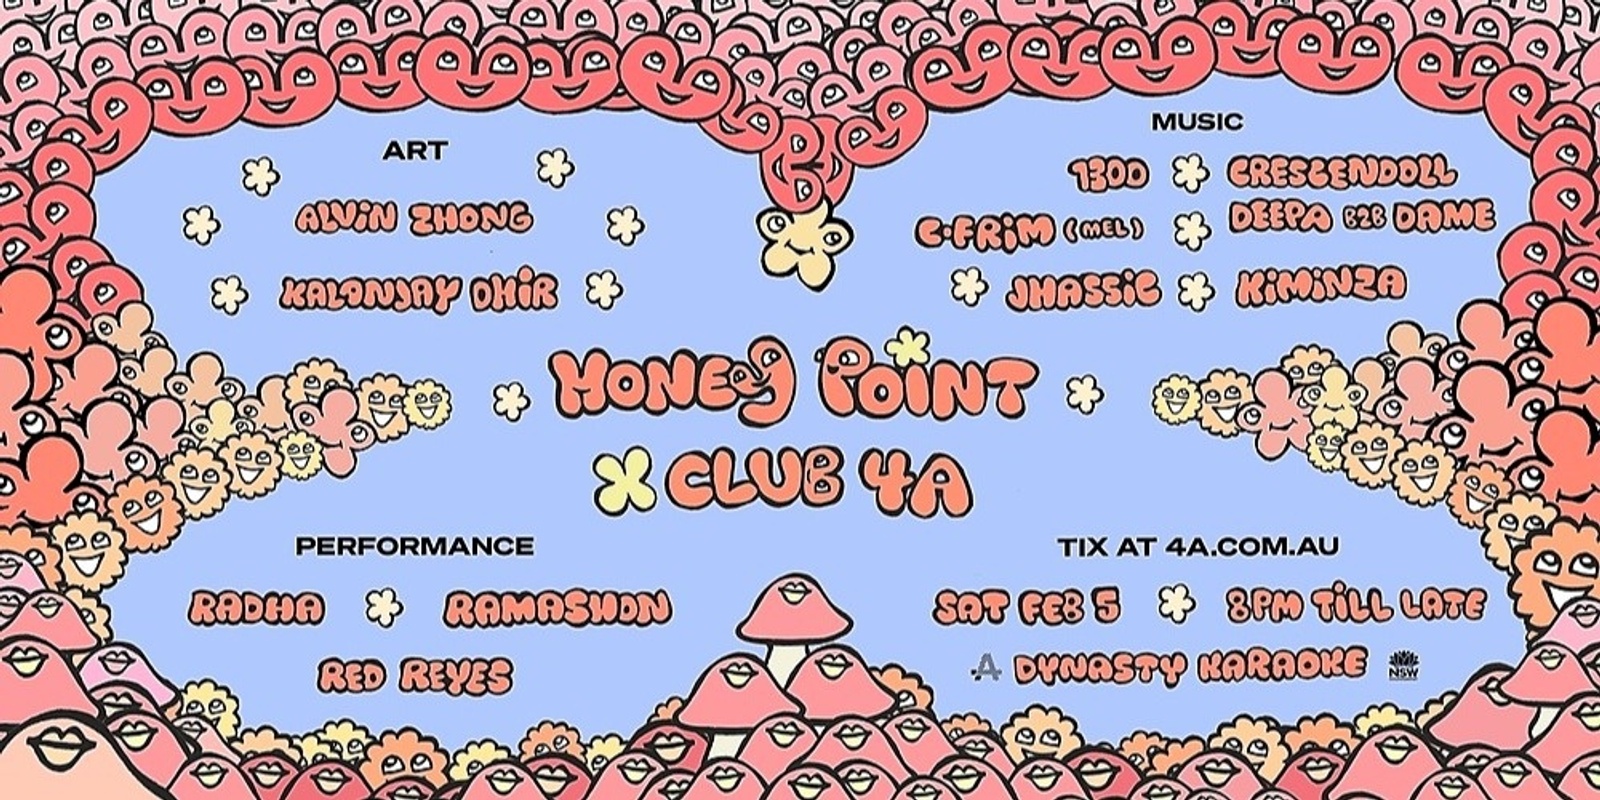 Banner image for Honey Point x CLUB 4A